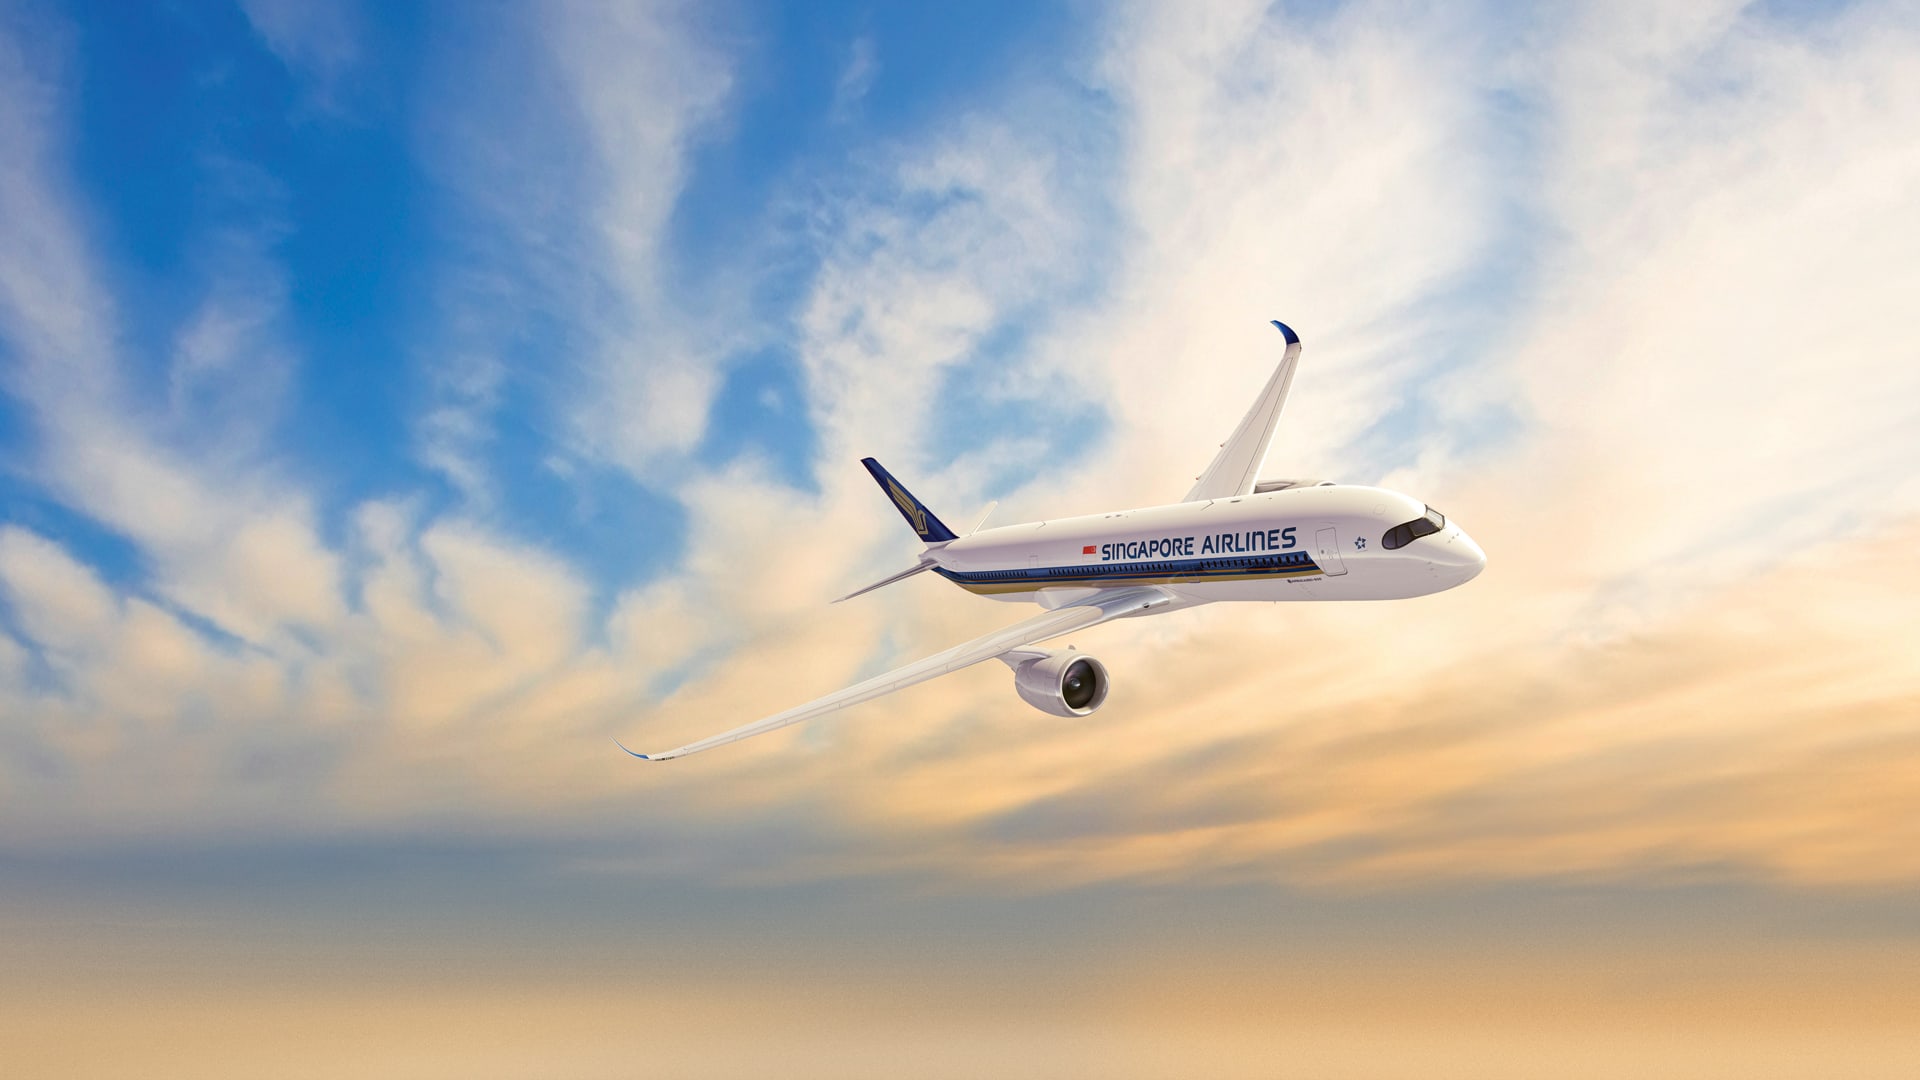 Singapore Airlines announces take-off of world’s longest commercial flight